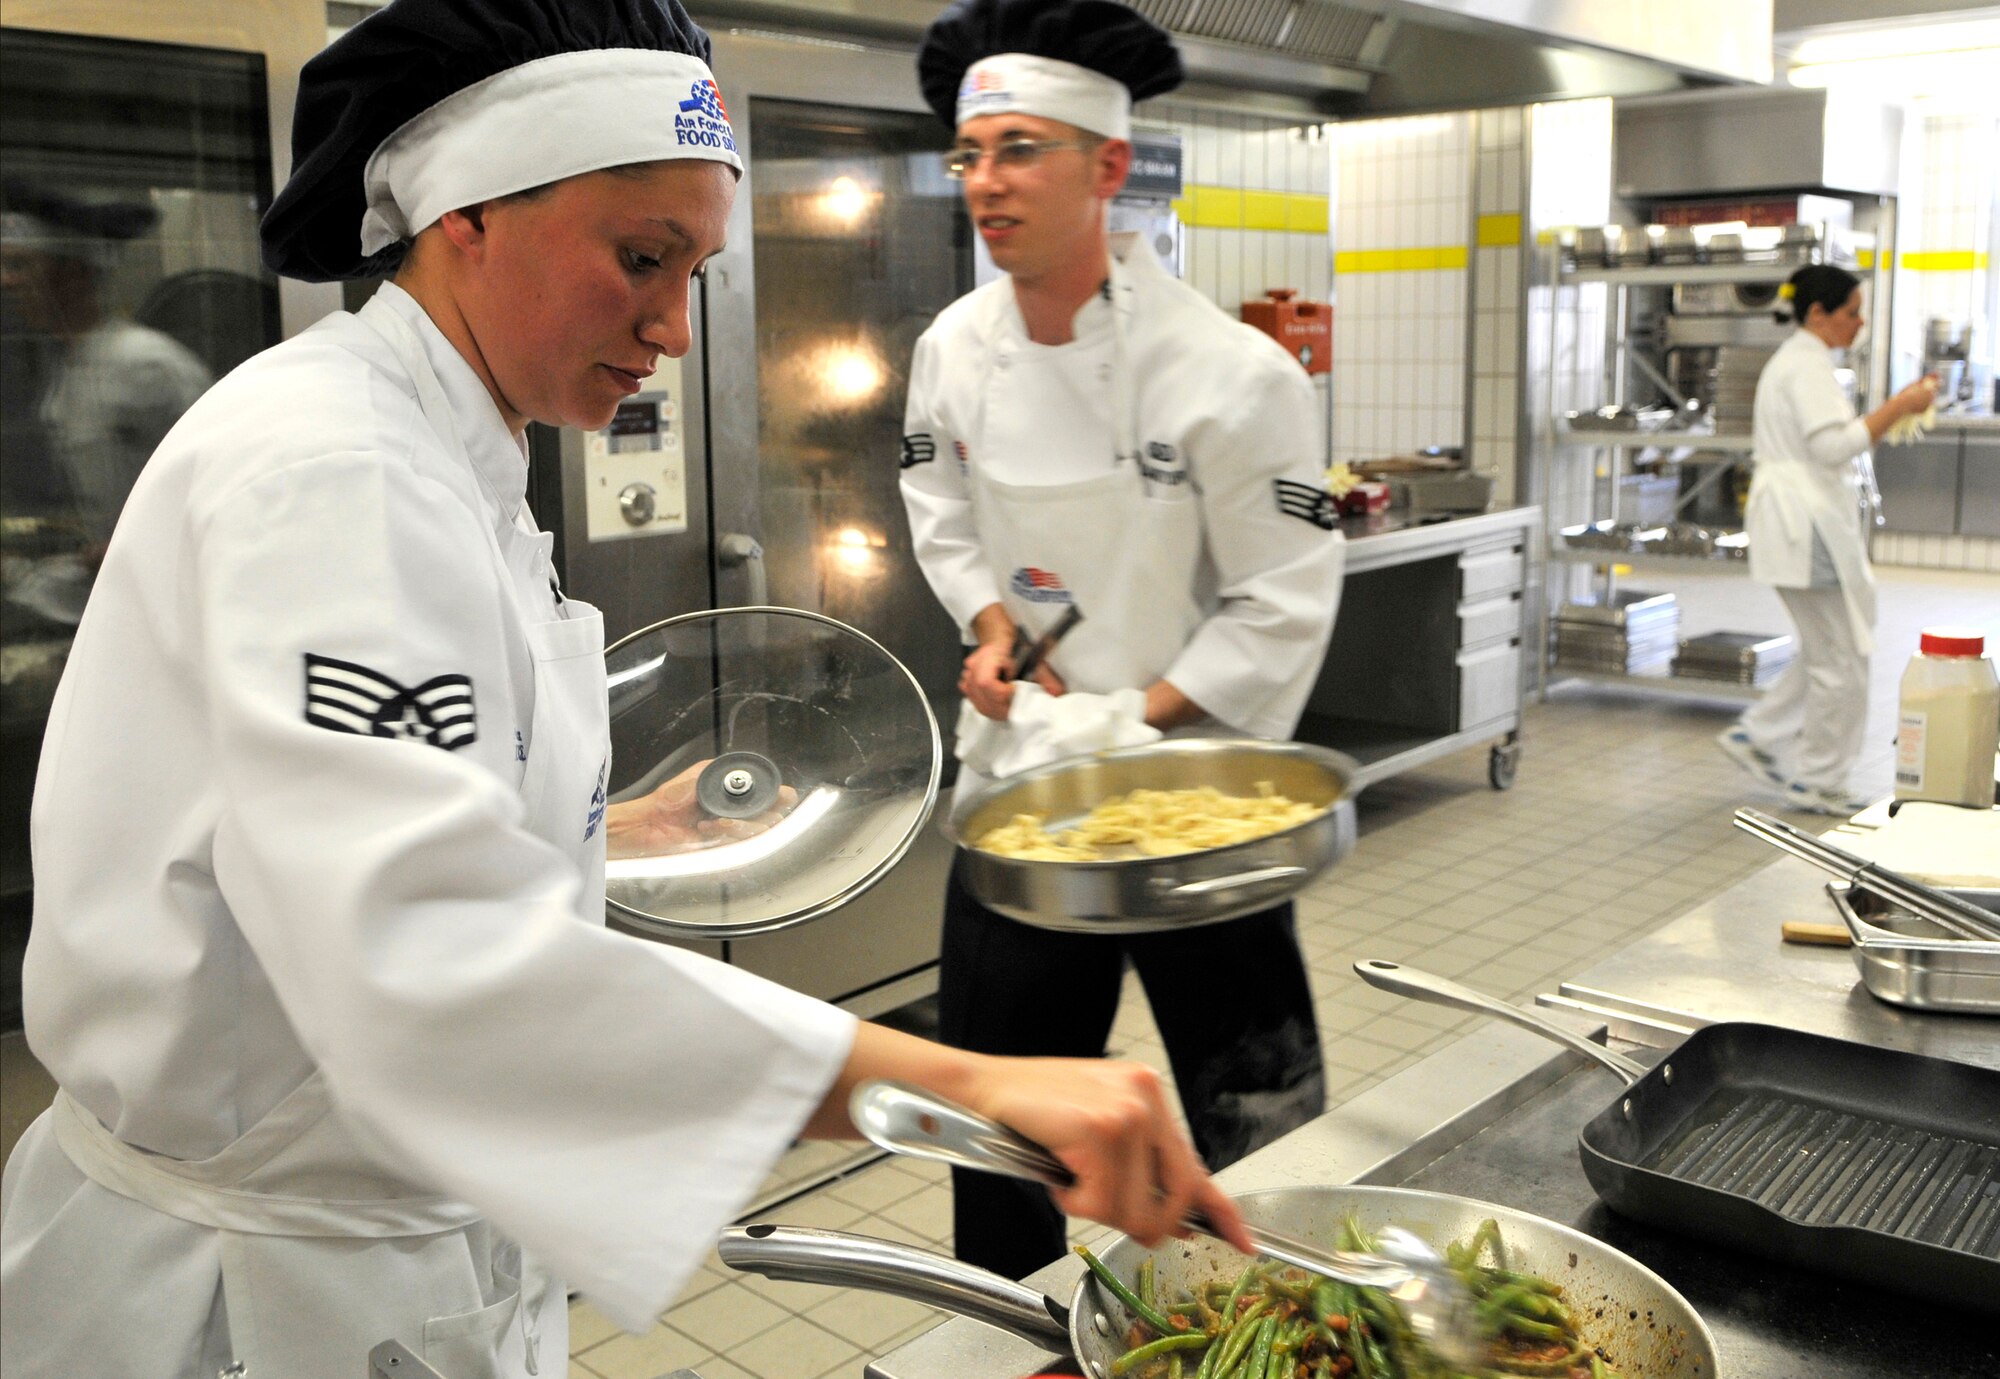 U.S. Air Force Senior Airmen Sheryl Stewart and Gary Adamoyurka, 435th Services Squadron chef's, compete in the Top Chef Competition at the Lindberg Hof Dining Facility on Kapaun Air Station June 17, 2009. (U.S. Air Force photo by Staff Sgt. Stephen J. Otero)